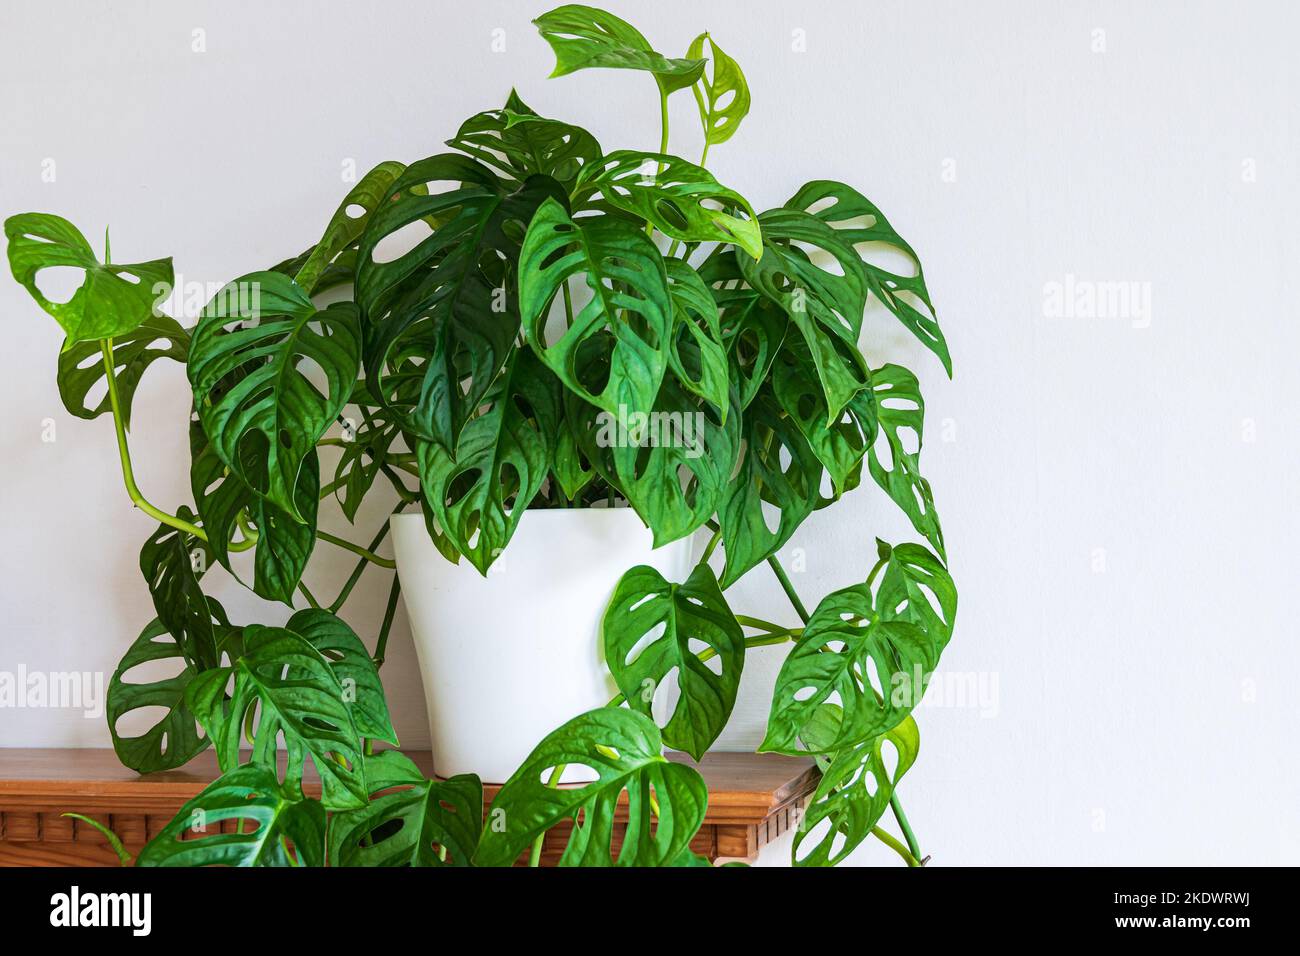 Lush green Swiss cheese plant (monstera adansonii) with fenestrations on a white background. Attractive houseplant against white backdrop. Stock Photo